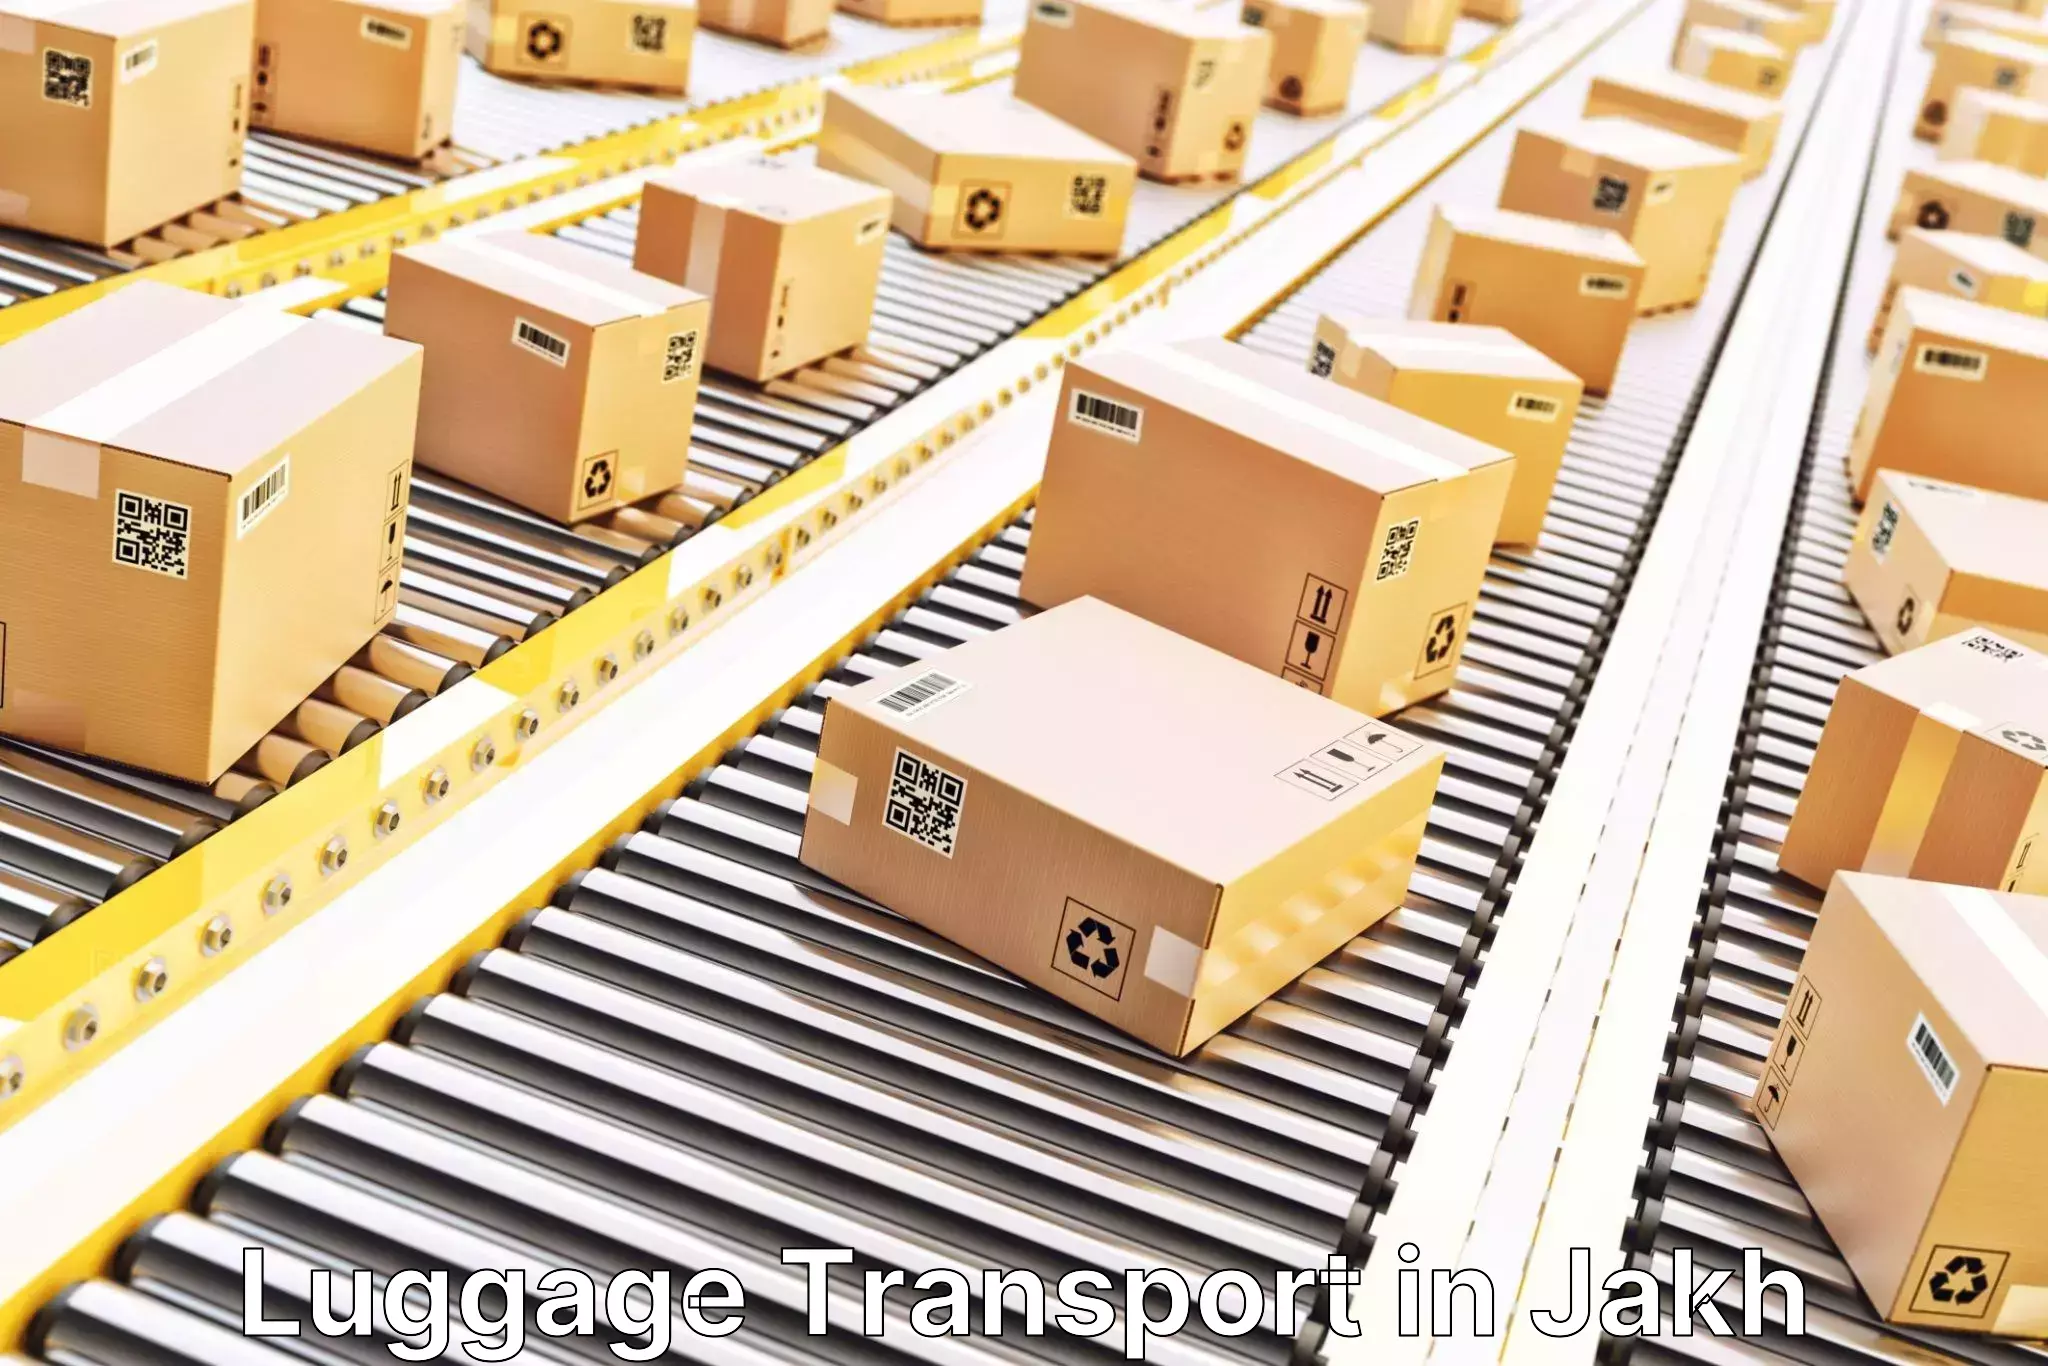 Luggage transfer service in Jakh